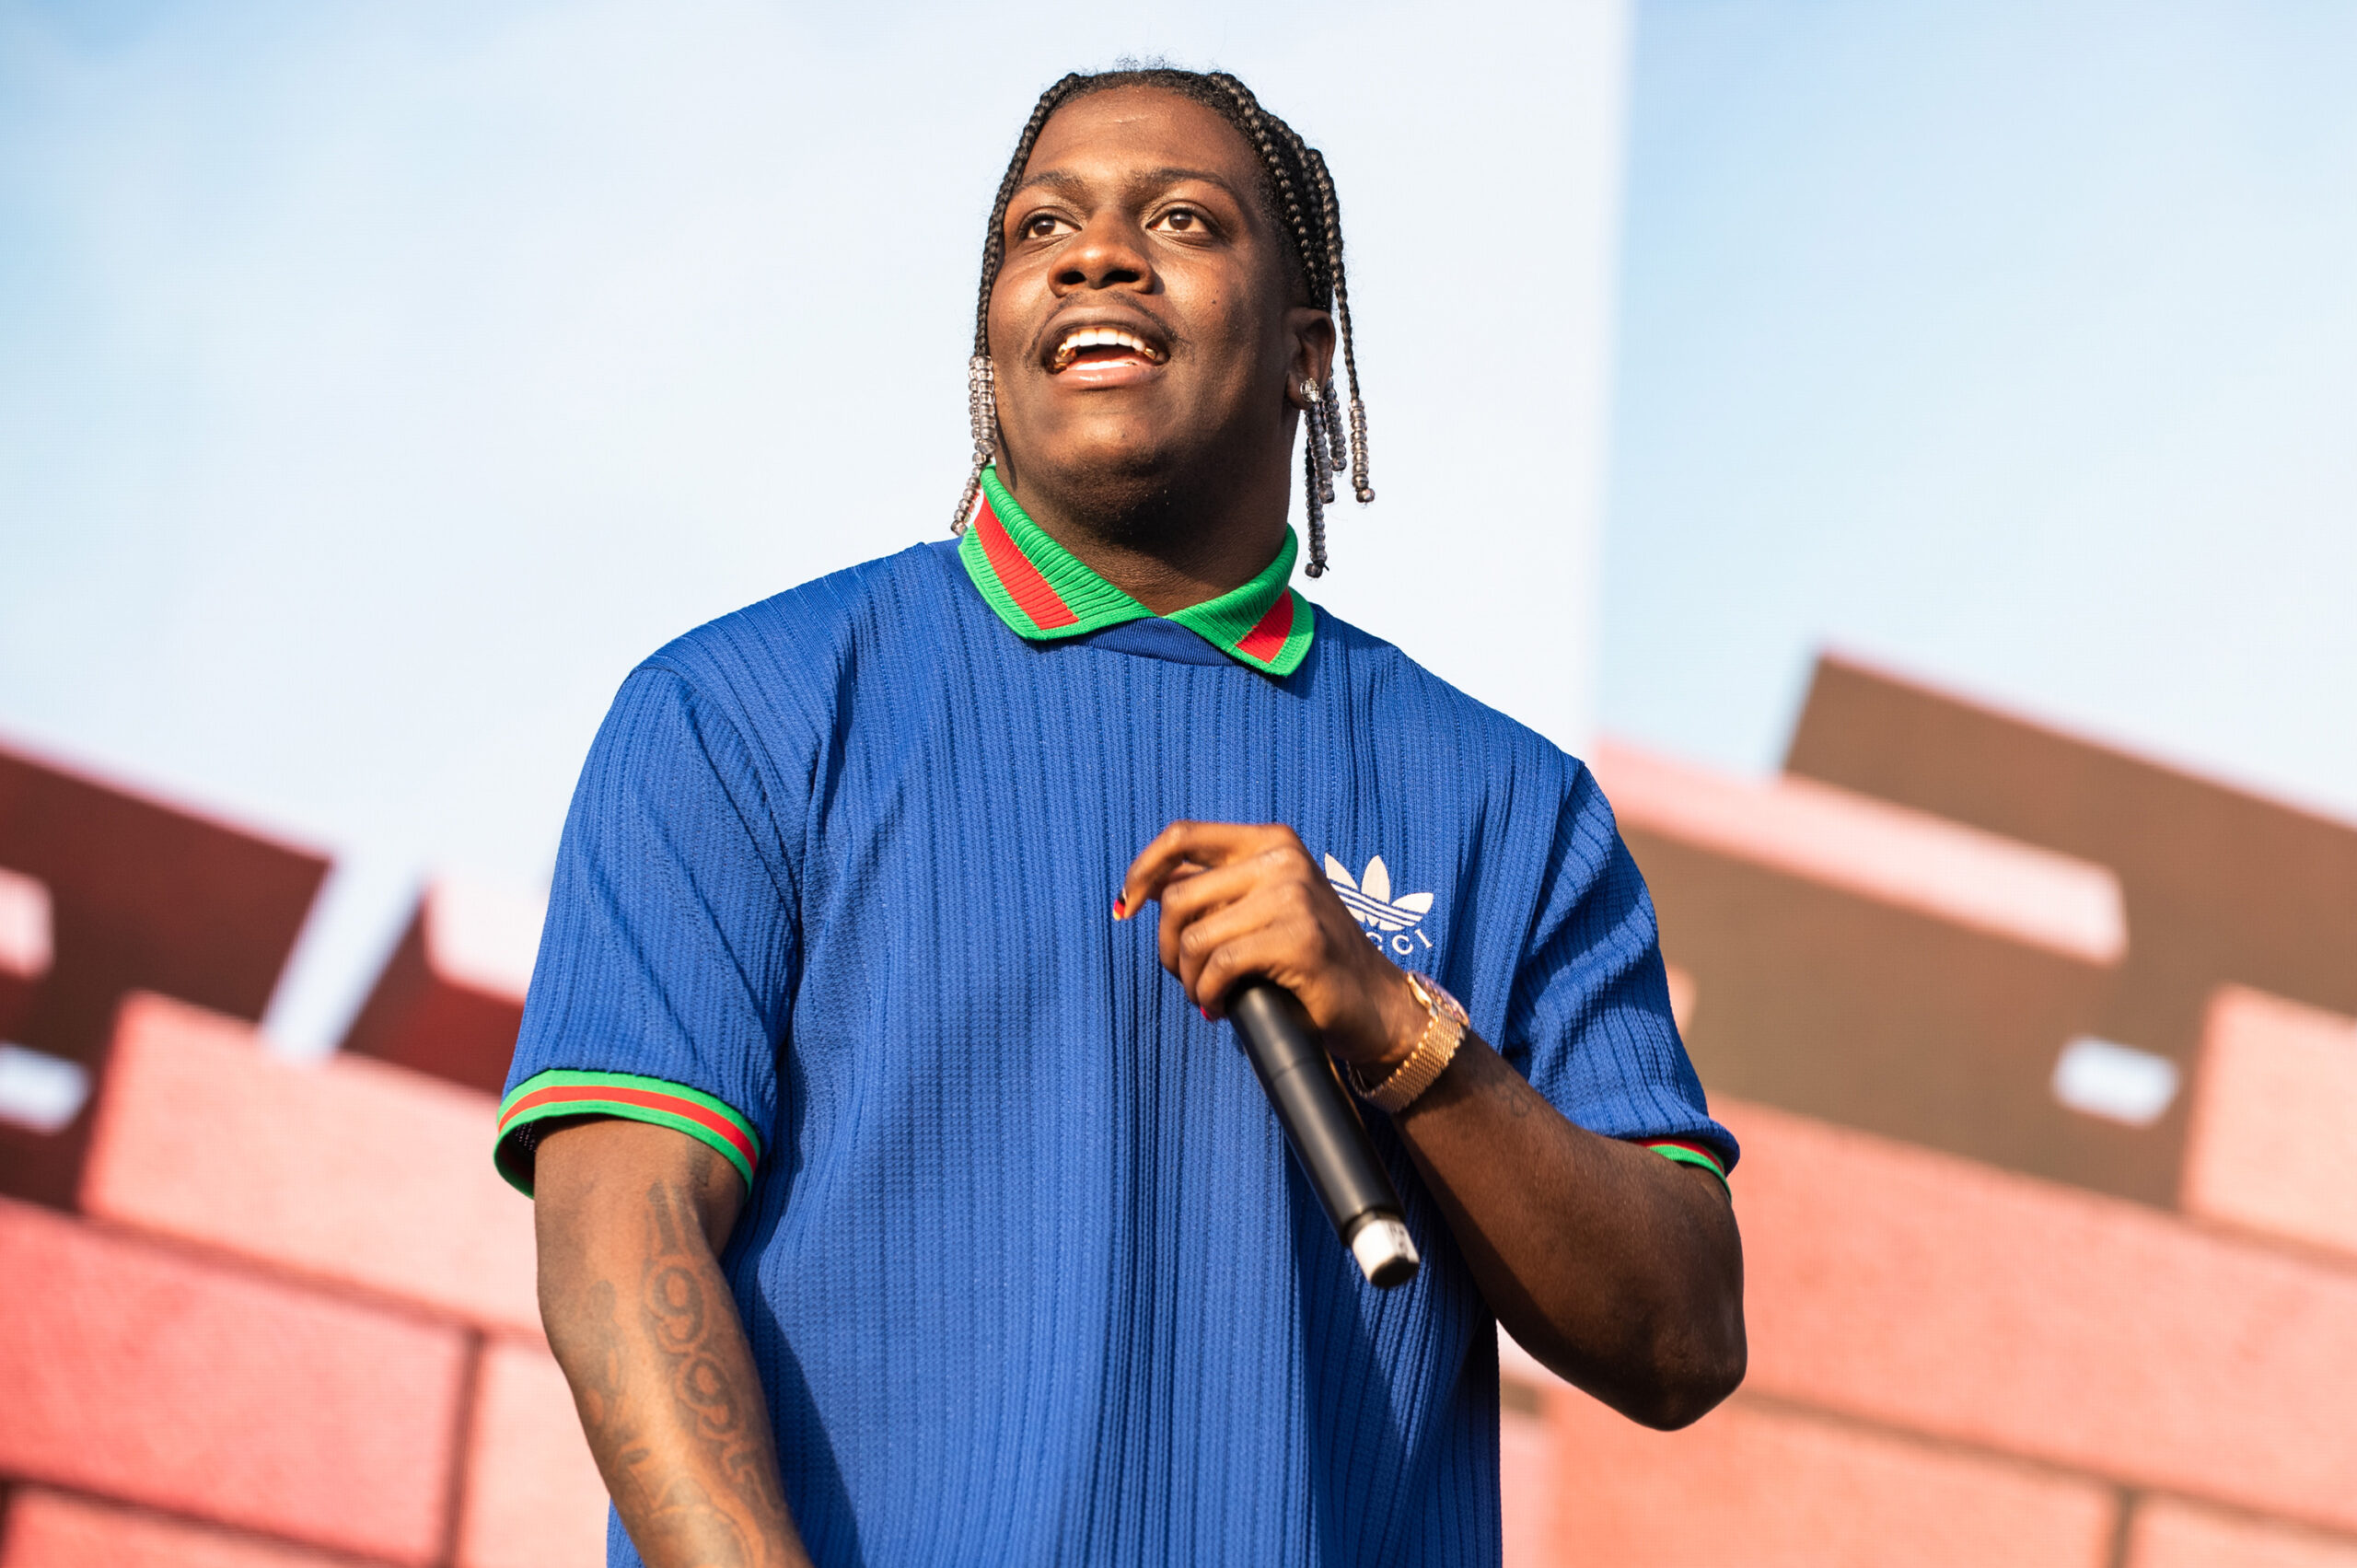 Lil Yachty Says DaBaby Had A Better Verse Than JAY-Z On Kanye West’s “Jail”